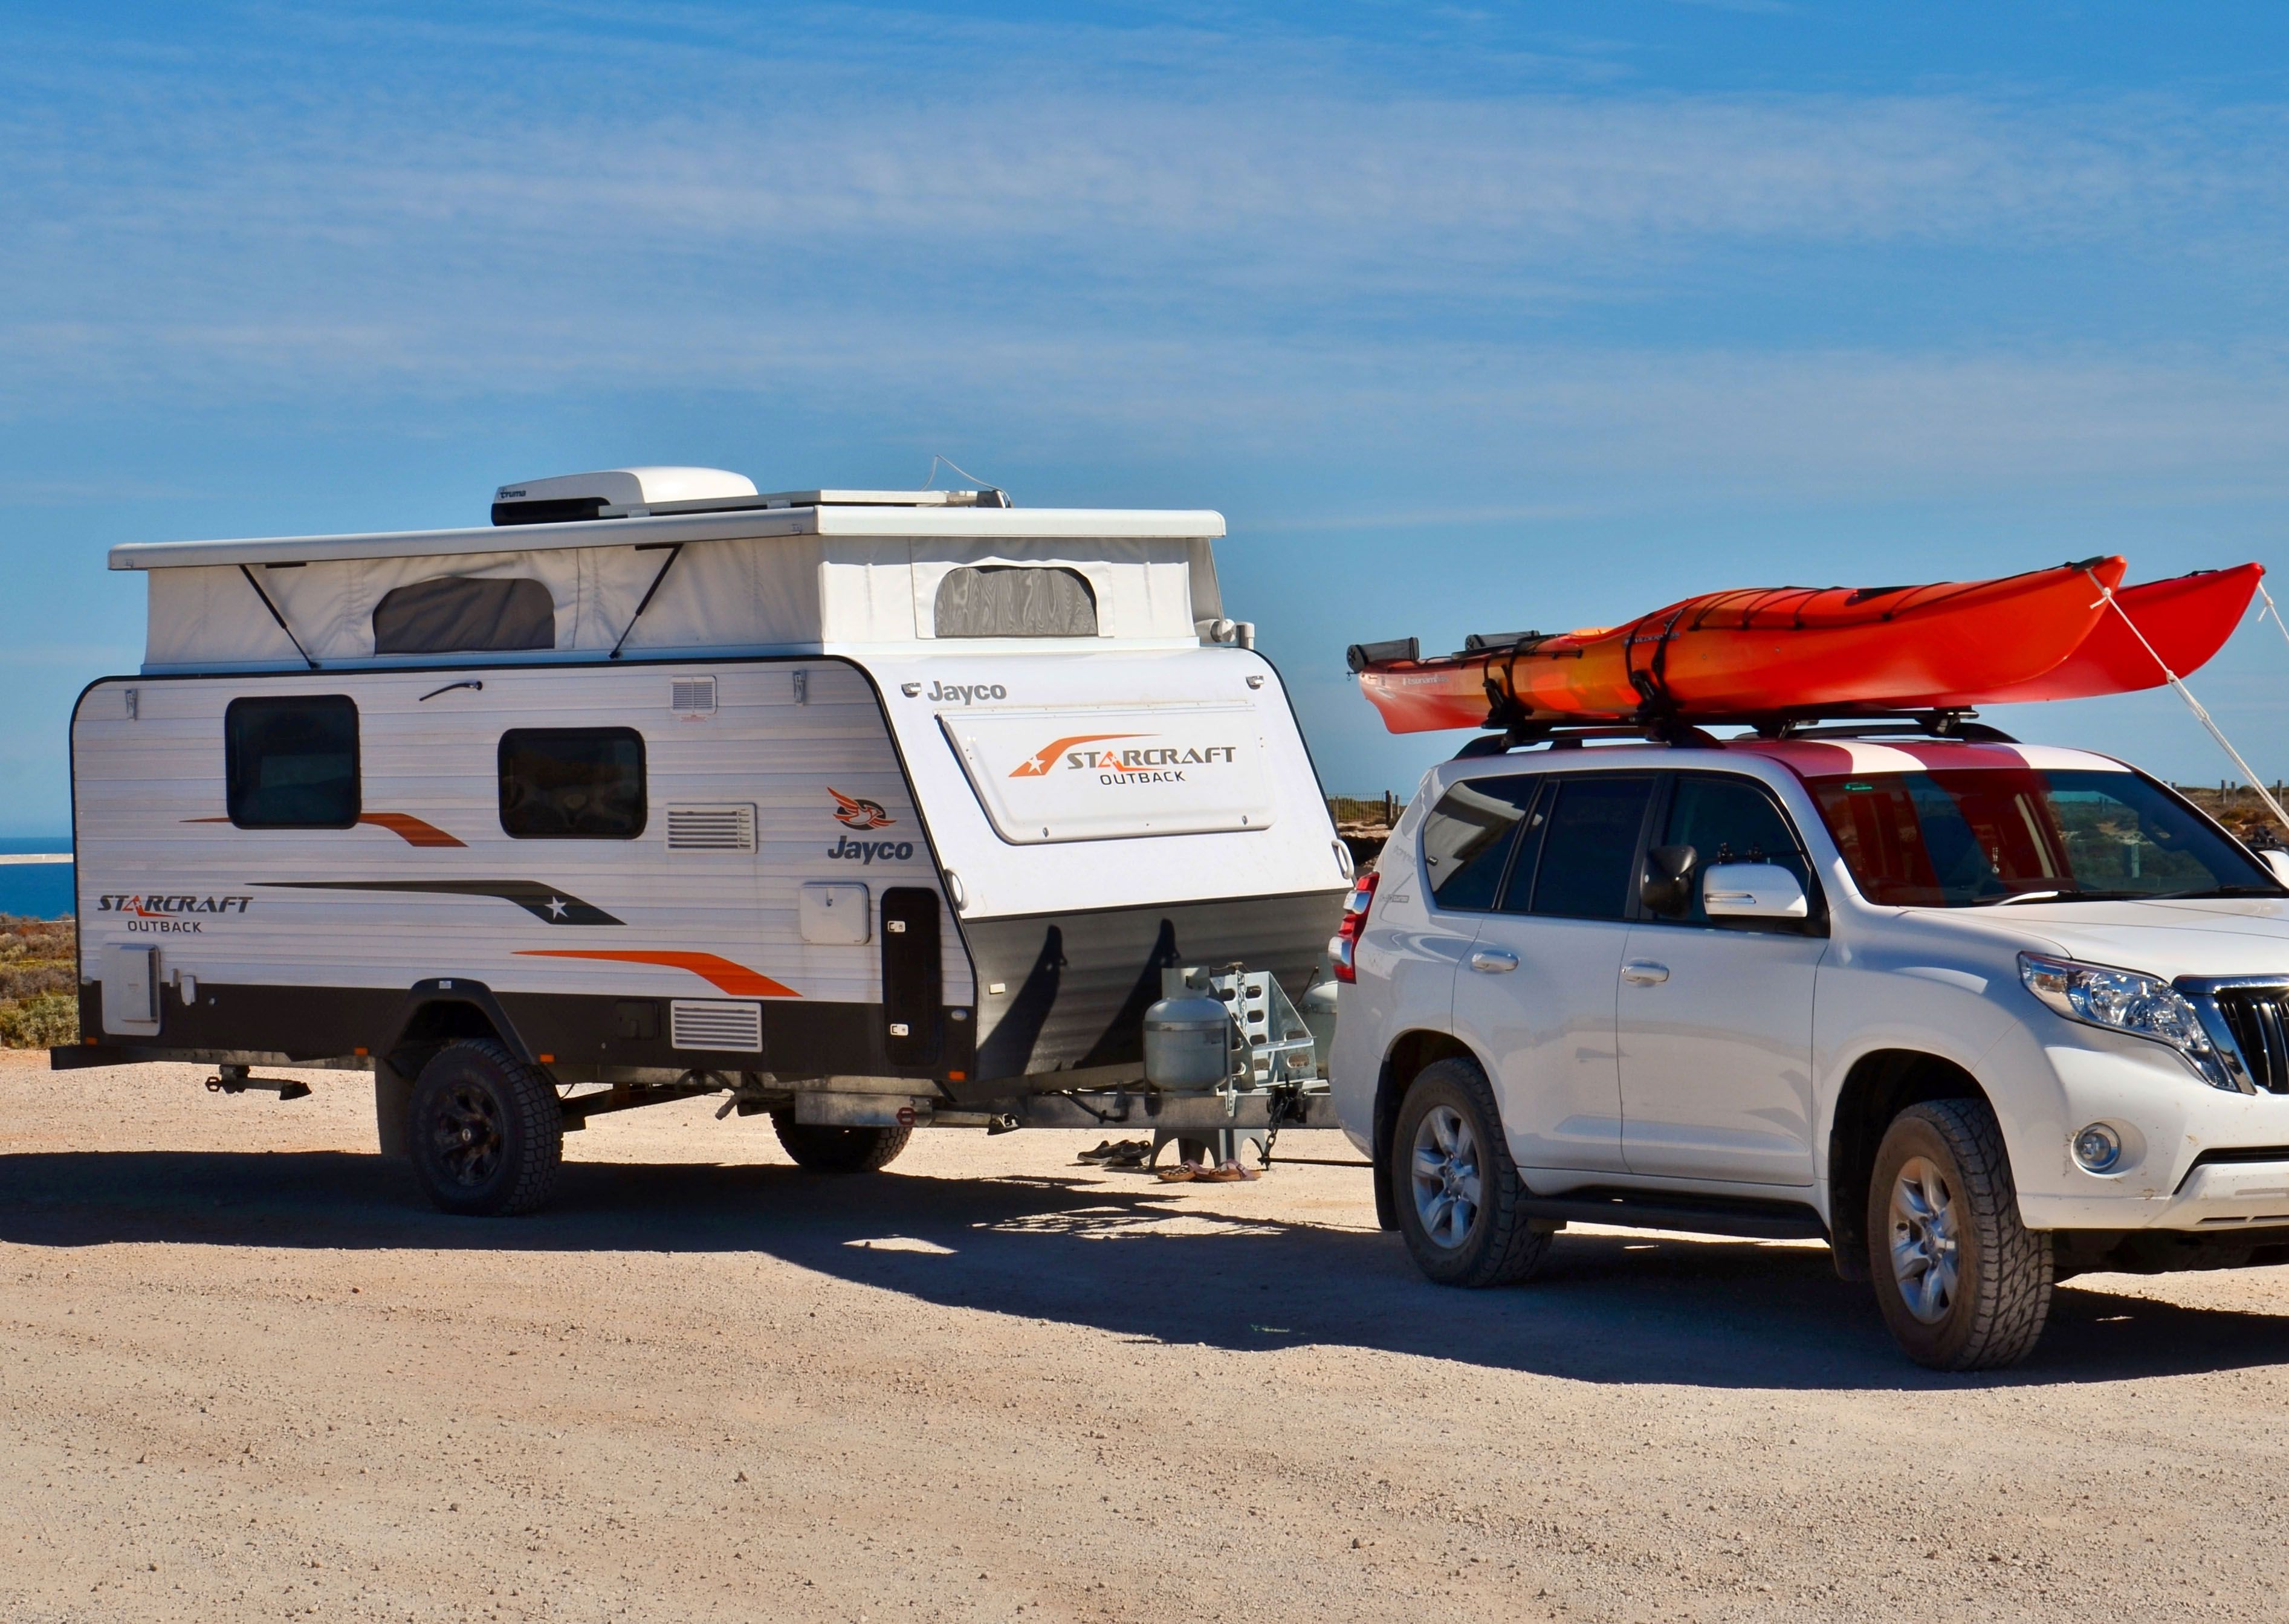 <p><b>Most common issue:</b> Mechanical and electrical safety issues</p><p>There are recalls out for multiple Jayco brands. Some of the most common issues include windshield wiper failure, faulty electrical wiring, and trailer hitch problems‚ which means that whatever you’re towing could detach completely as you drive. “Because of repeated failures in ventilation, plumbing, and fixtures, there is a significant likelihood of ongoing maintenance expenses” for Jaycos, RVer Imani Francies of<a href="https://www.4autoinsurancequote.com/"> 4Auto Insurance Quote </a>says.</p><p><b>Related: </b><a href="https://blog.cheapism.com/what-kind-of-rv-can-i-afford/">How Much RV Can You Get for Your Money?</a></p>